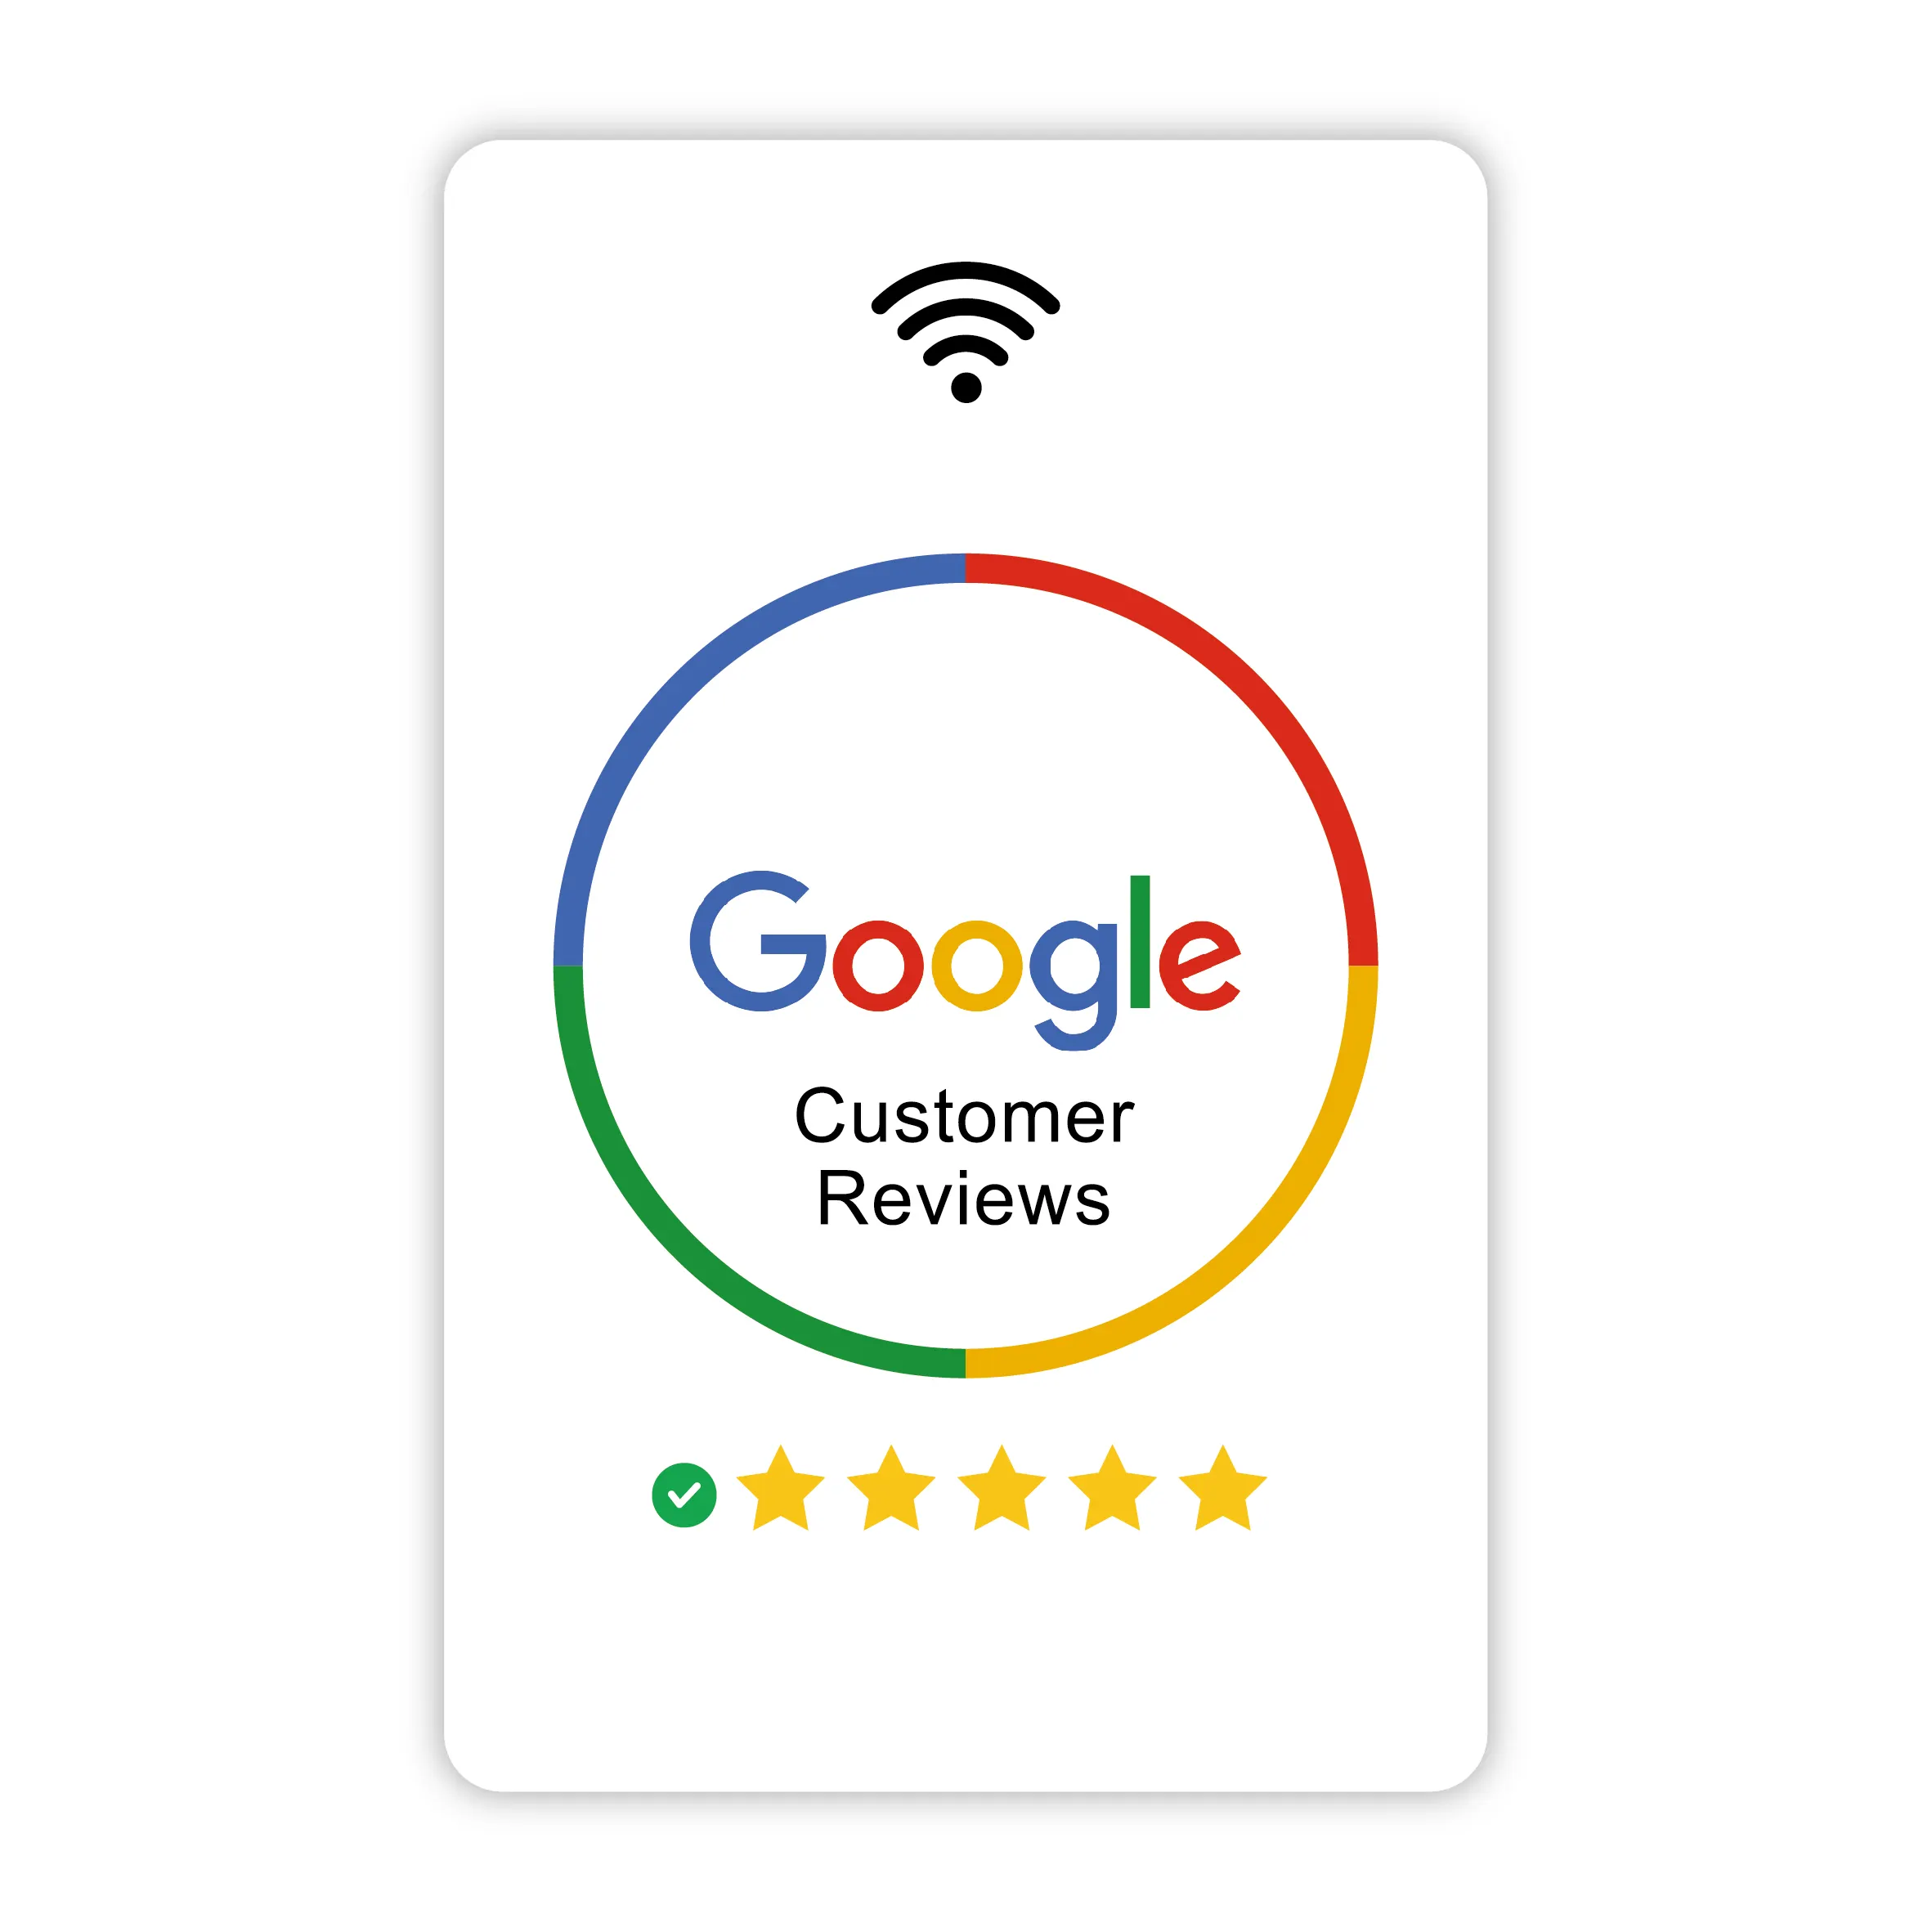 Tappable Google Review Card, Traga instantaneamente os clientes Review Google card NFC Contactless Google Review Card